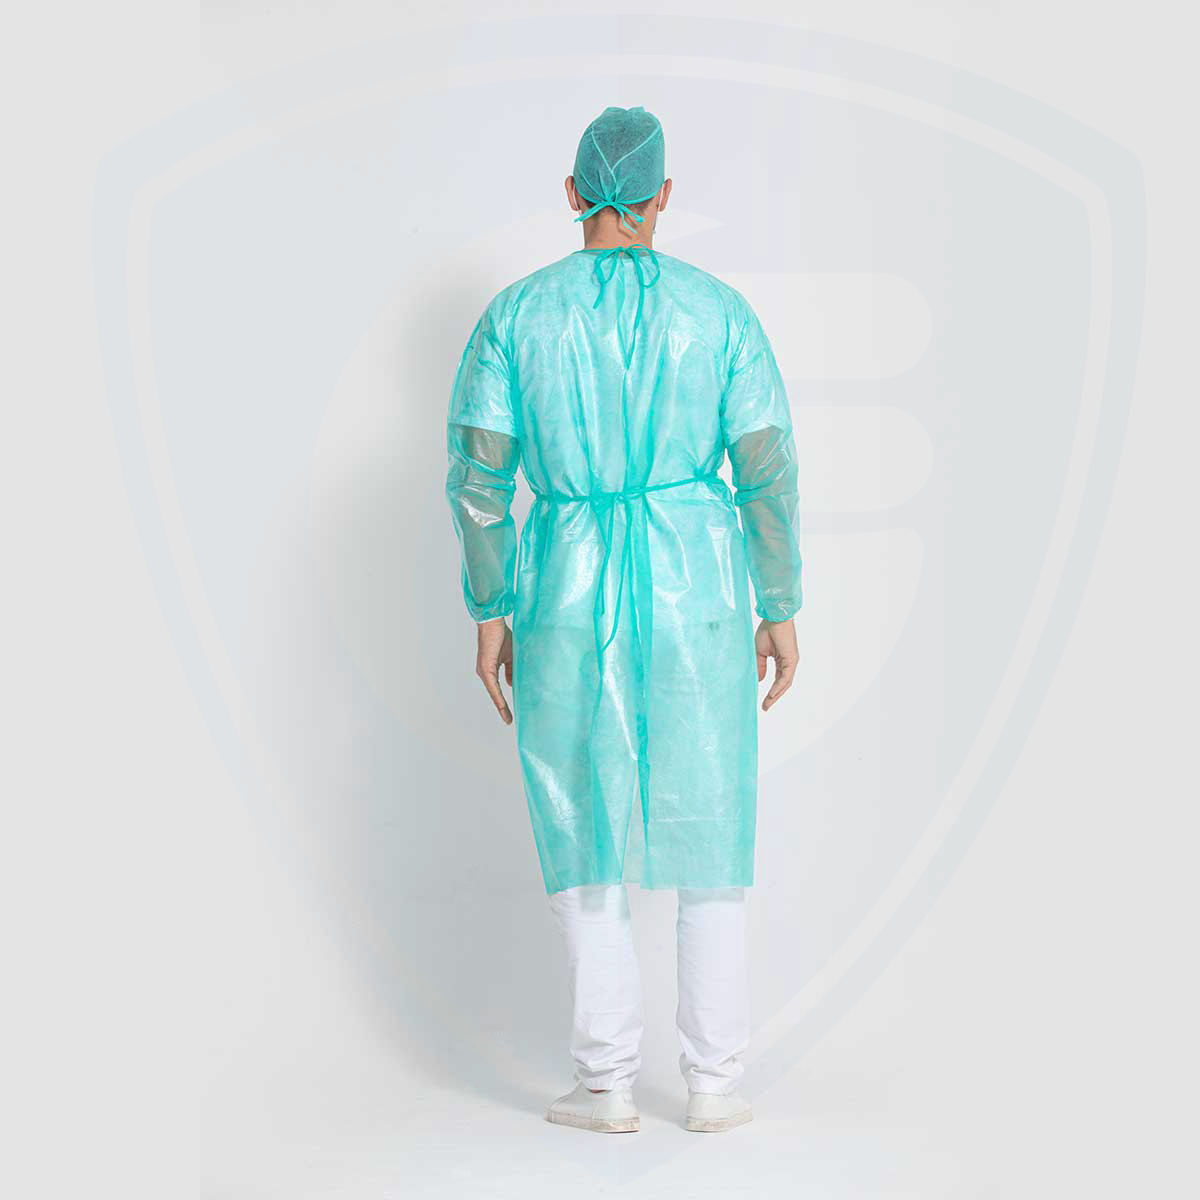 PPE Disposable Protective Isolation Supply Waterproof Non-Woven Fabric Gown 